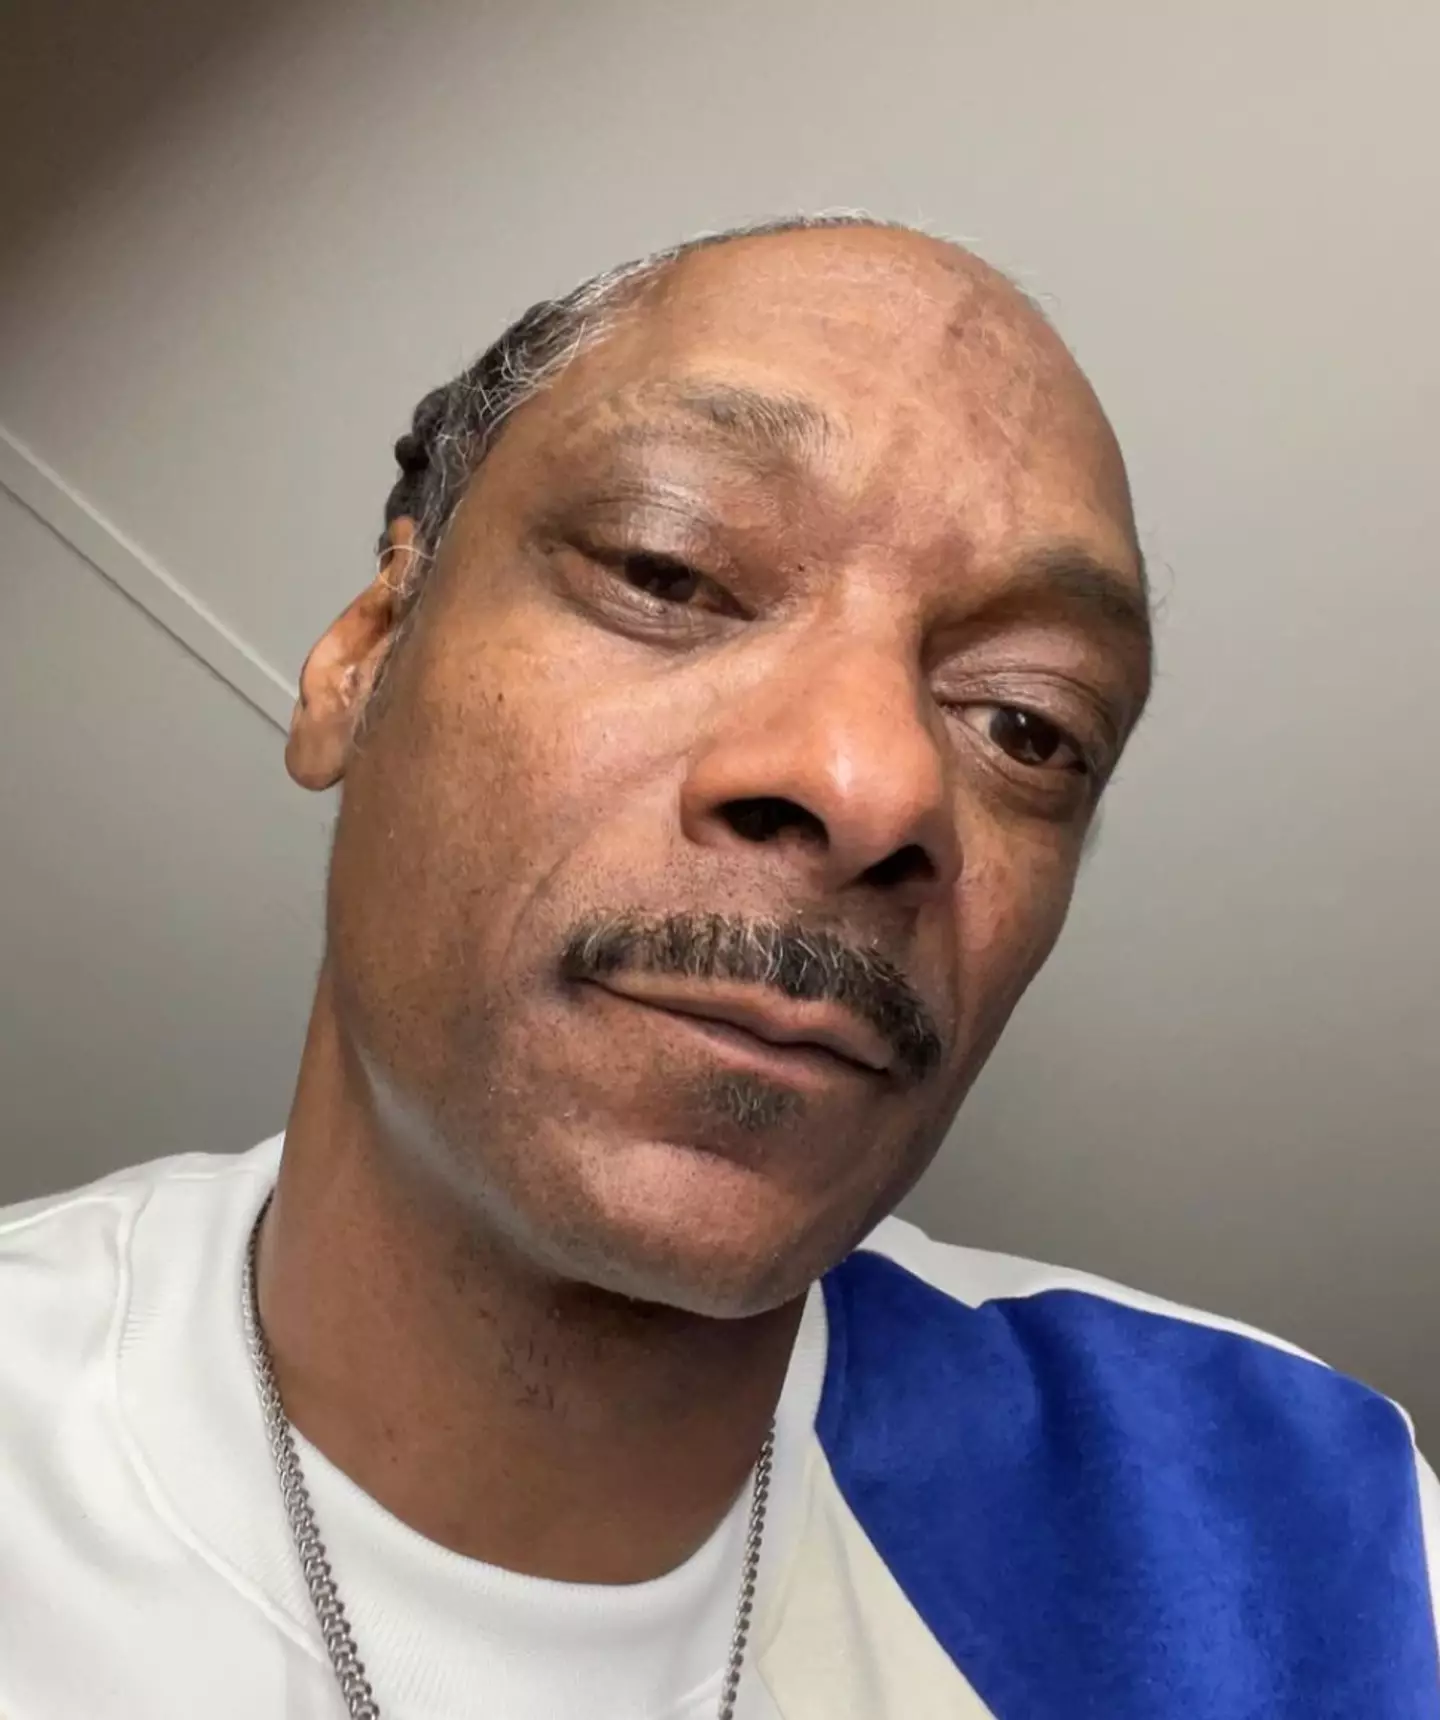 Snoop has asked for fans to respect his privacy.